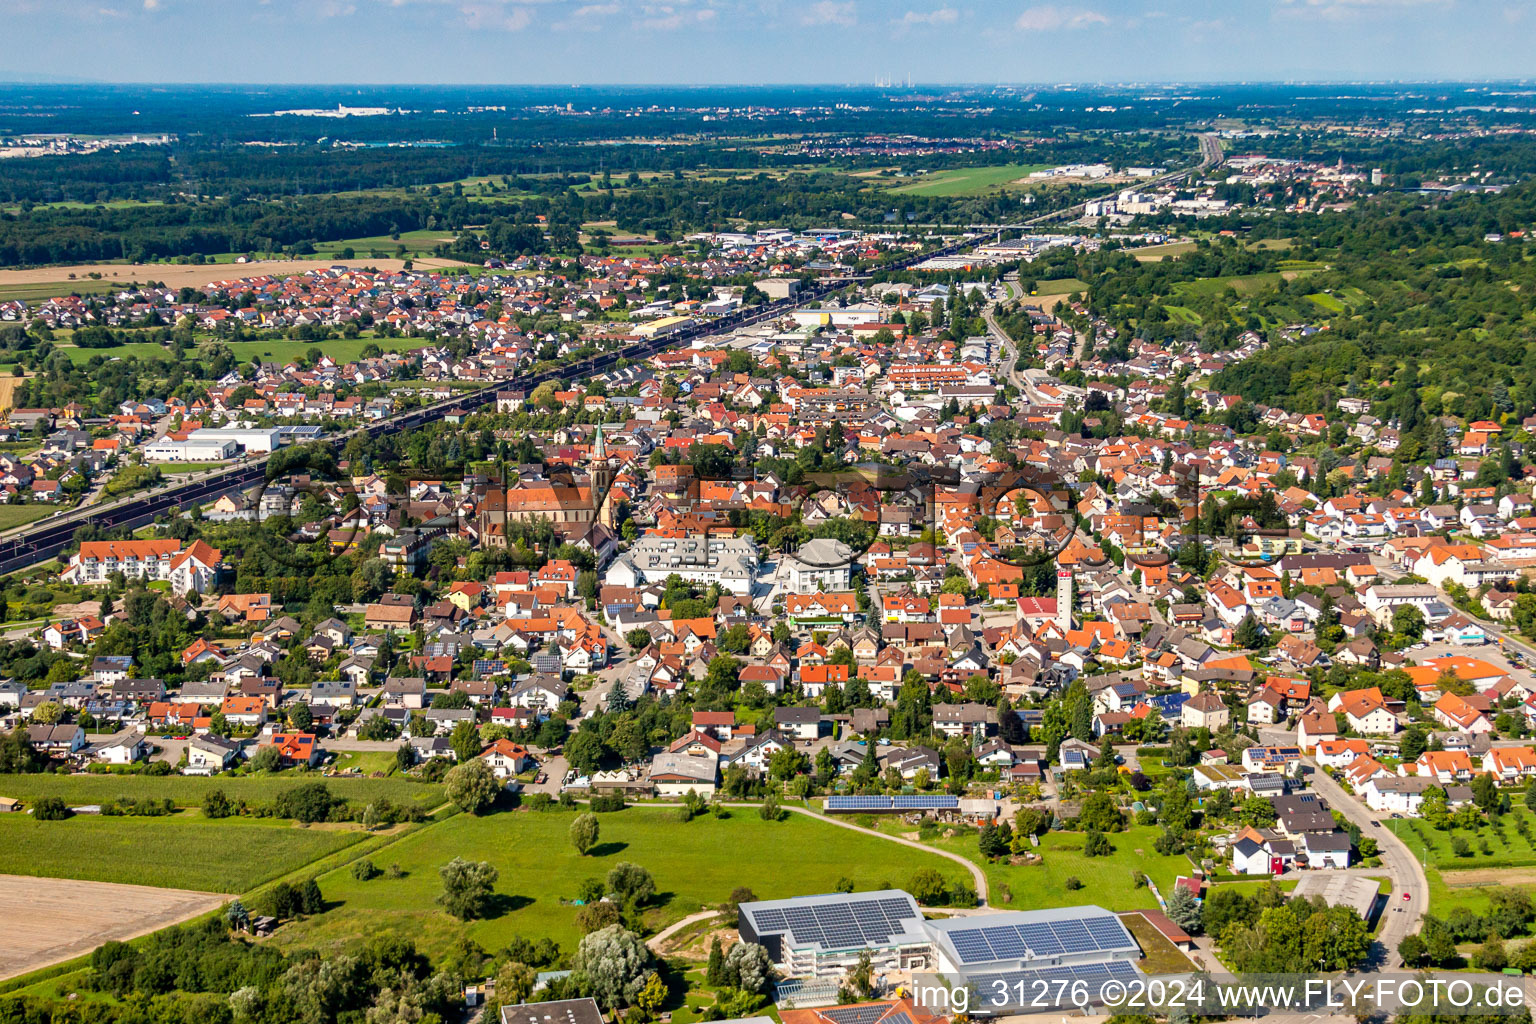 Town View of the streets and houses of the residential areas in Sinzheim in the state Baden-Wurttemberg, Germany